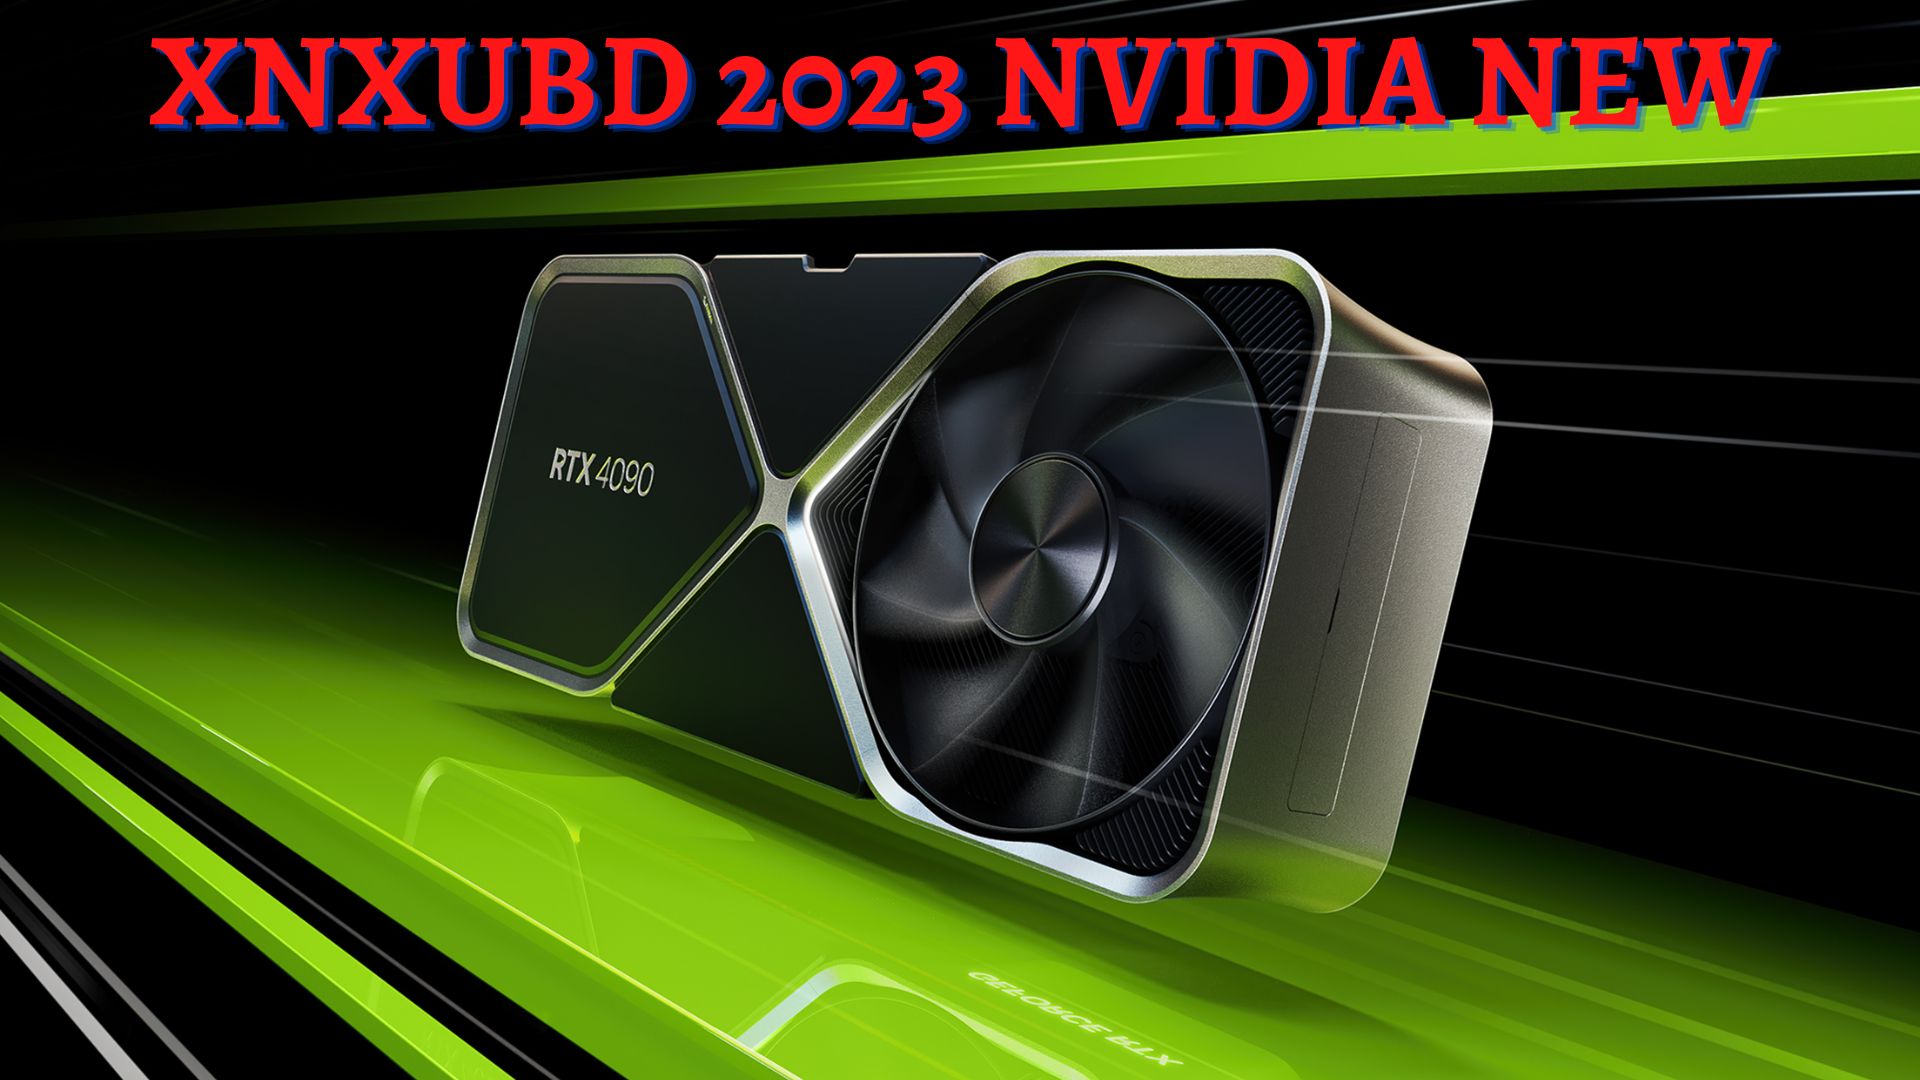 Xnxubd 2023 Nvidia New text on the background of RTX 4090